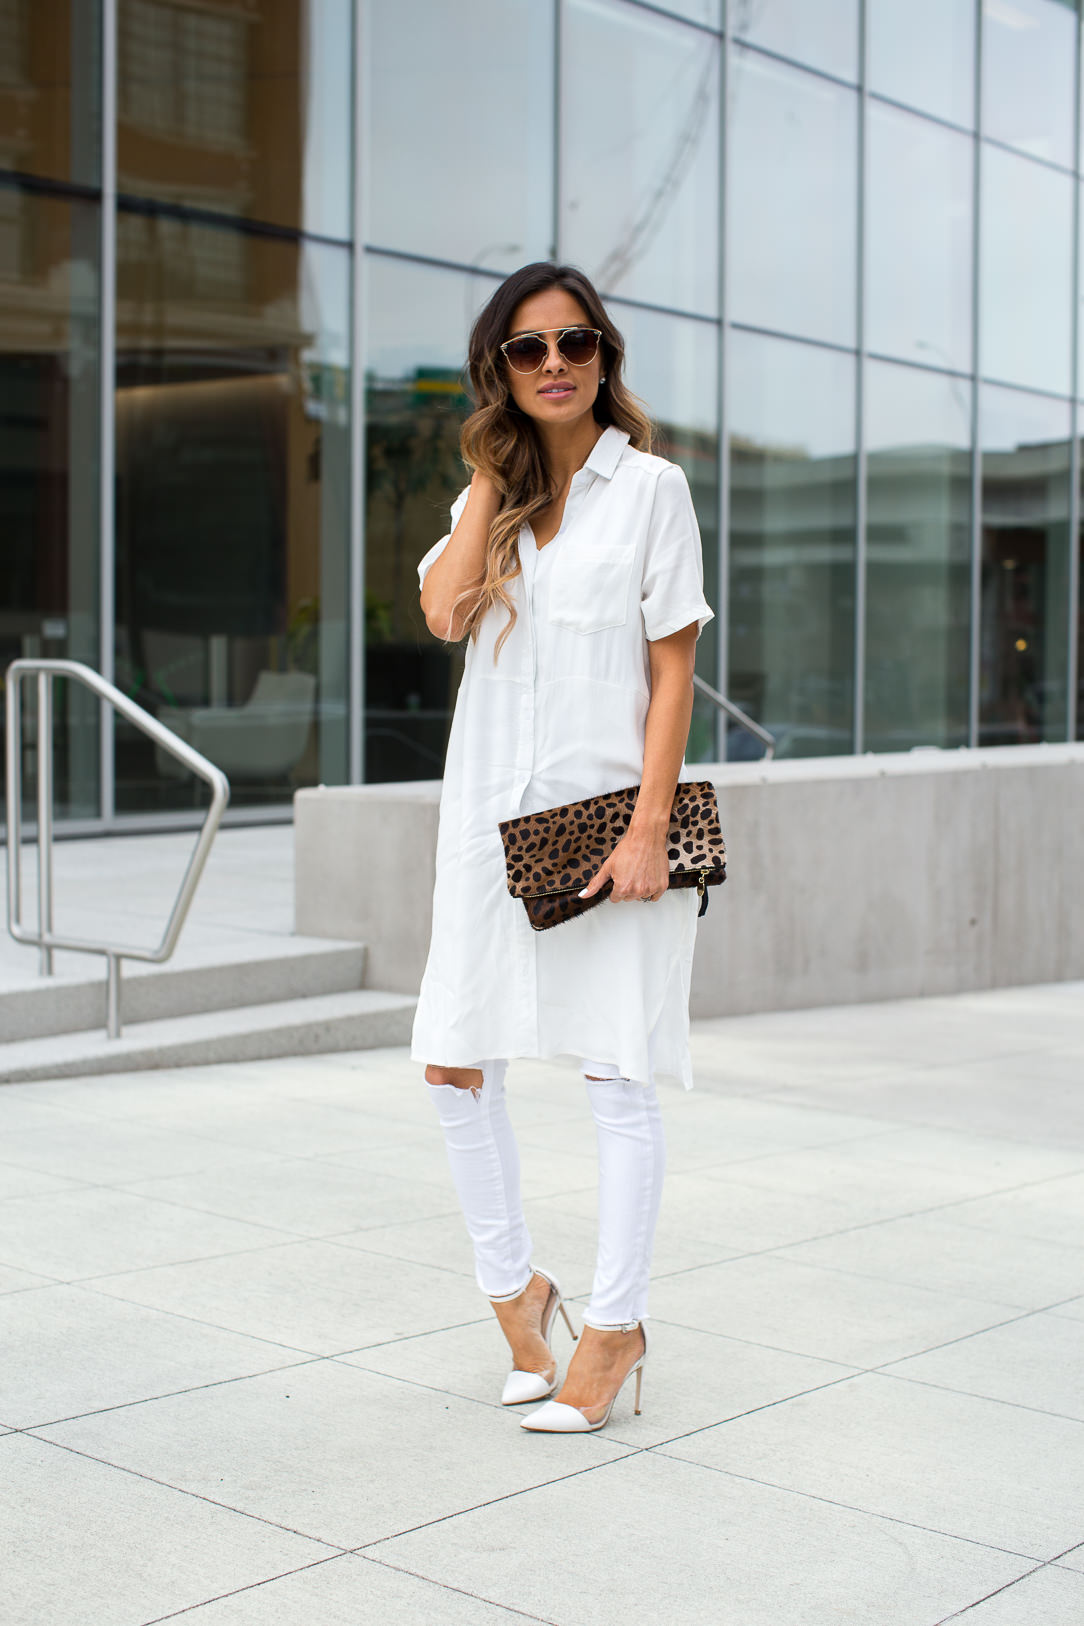 http://www.miamiamine.com/wp-content/uploads/2016/04/Where-To-buy-White-Jeans.jpg